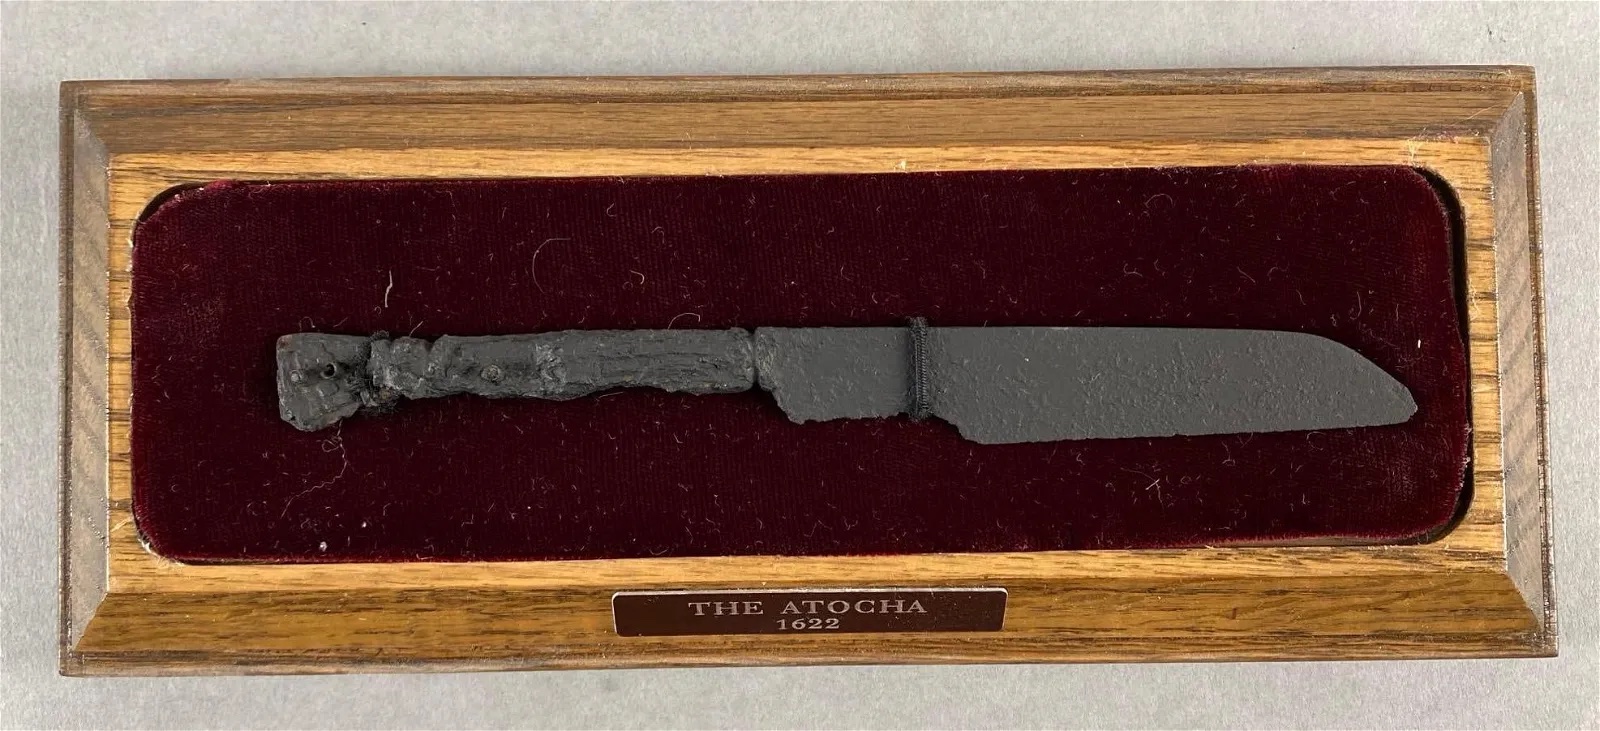 Iron knife recovered from the Spanish Atocha shipwreck, estimated at $1,000-$5,000 at Matthew Bullock.